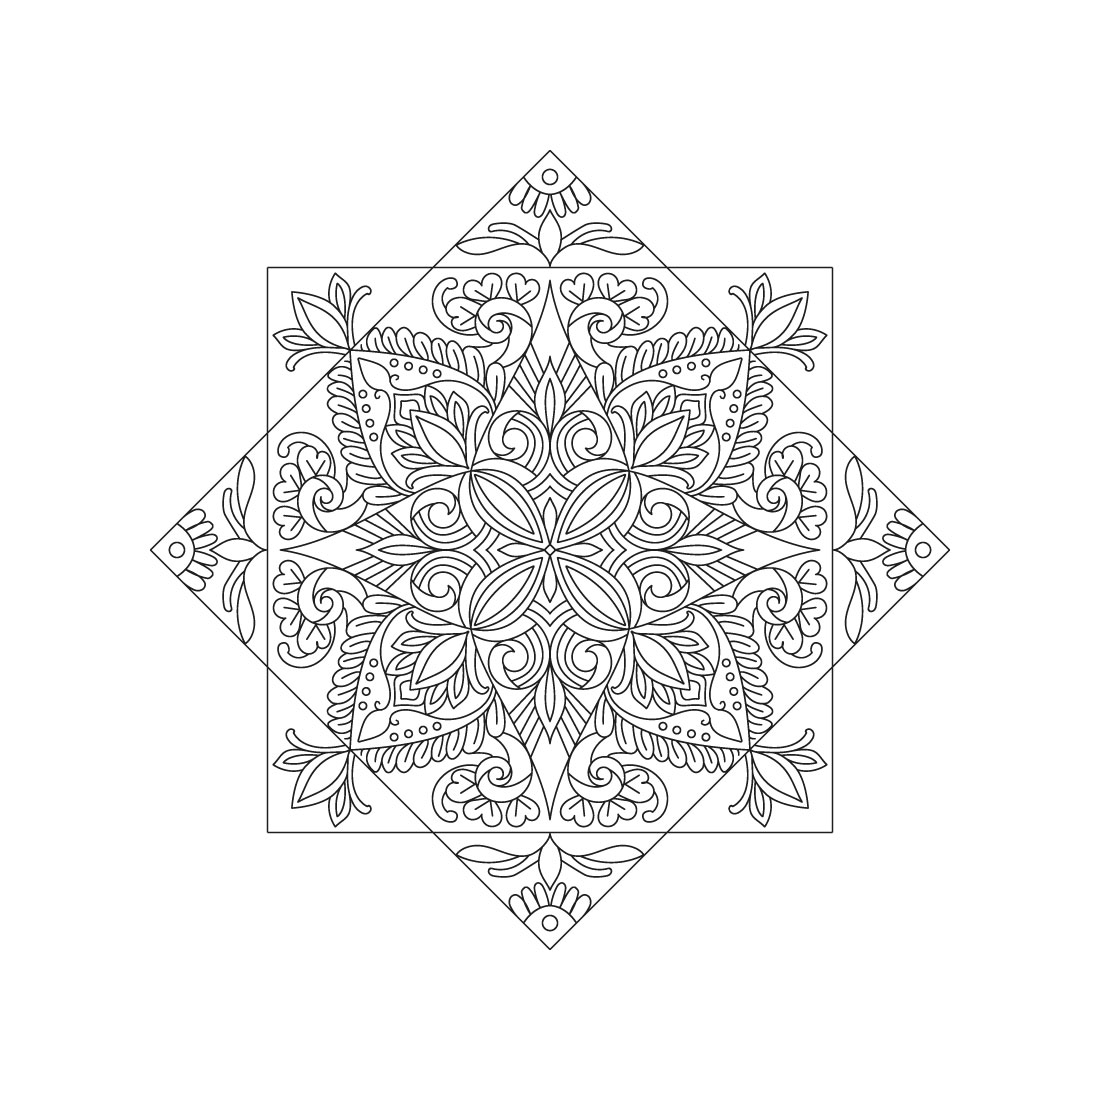 Bundle of 10 Tranquil Gardens Mandala Coloring Book Pages preview image.